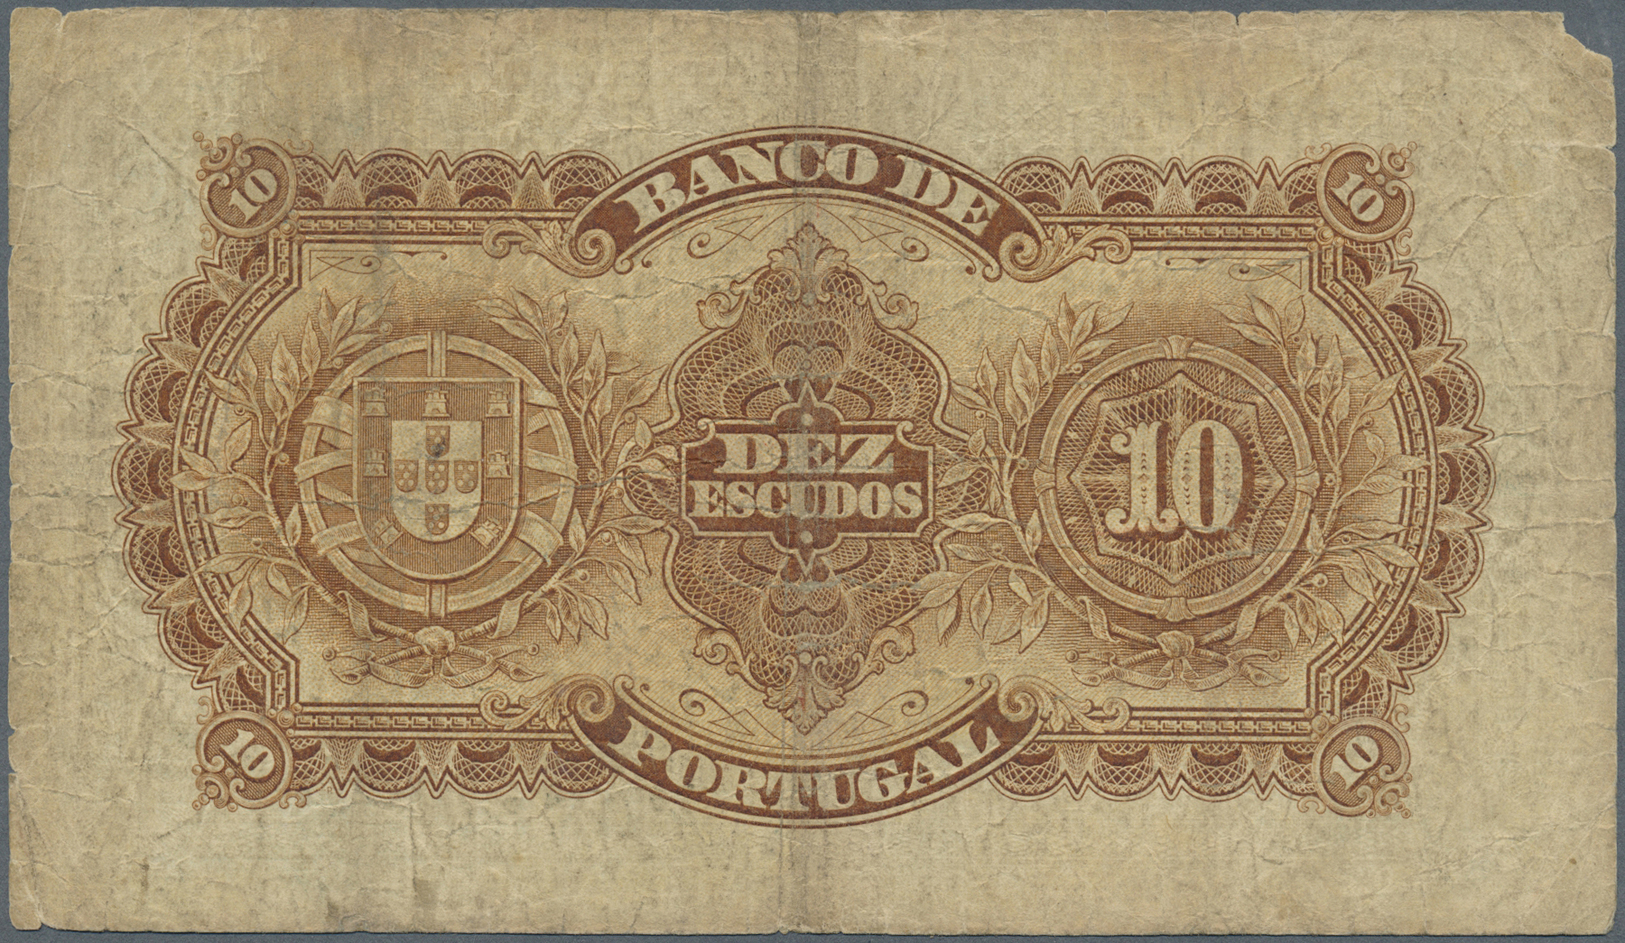 02005 Portugal: 10 Escudos 1925 P. 134 In Stronger Used Condition With Stonger Folds, Stained Paper And A Small Missing - Portugal